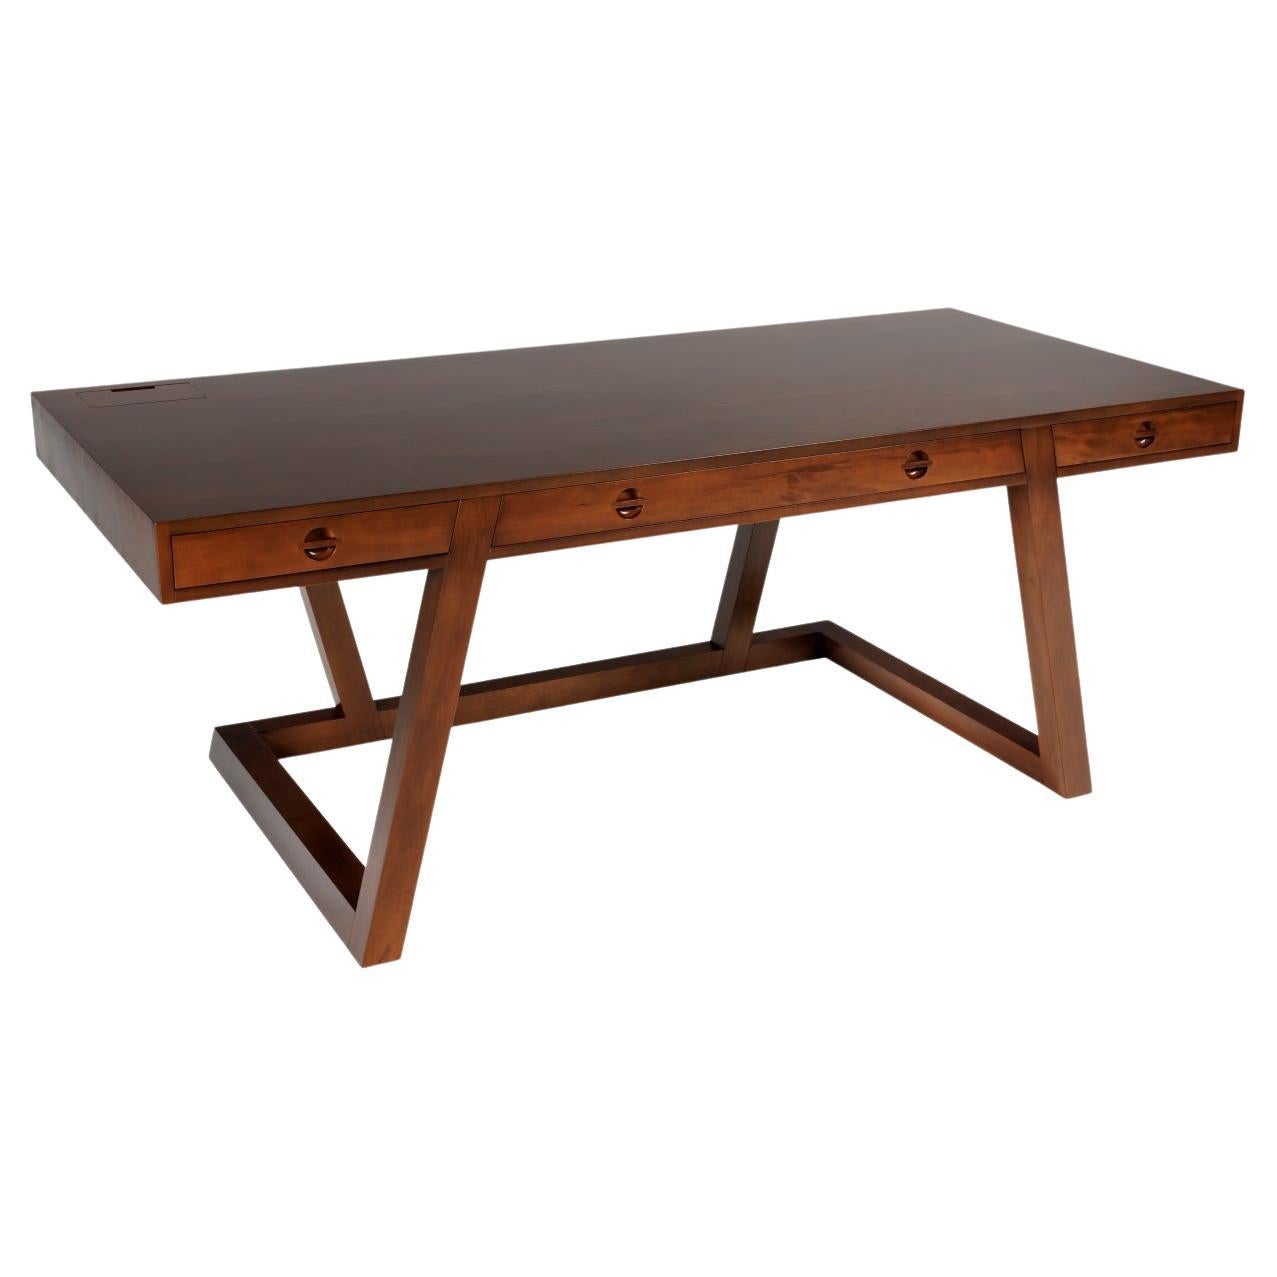 Luxury Mid-Century Modern Desk made from Sustainable River Rescued Wood